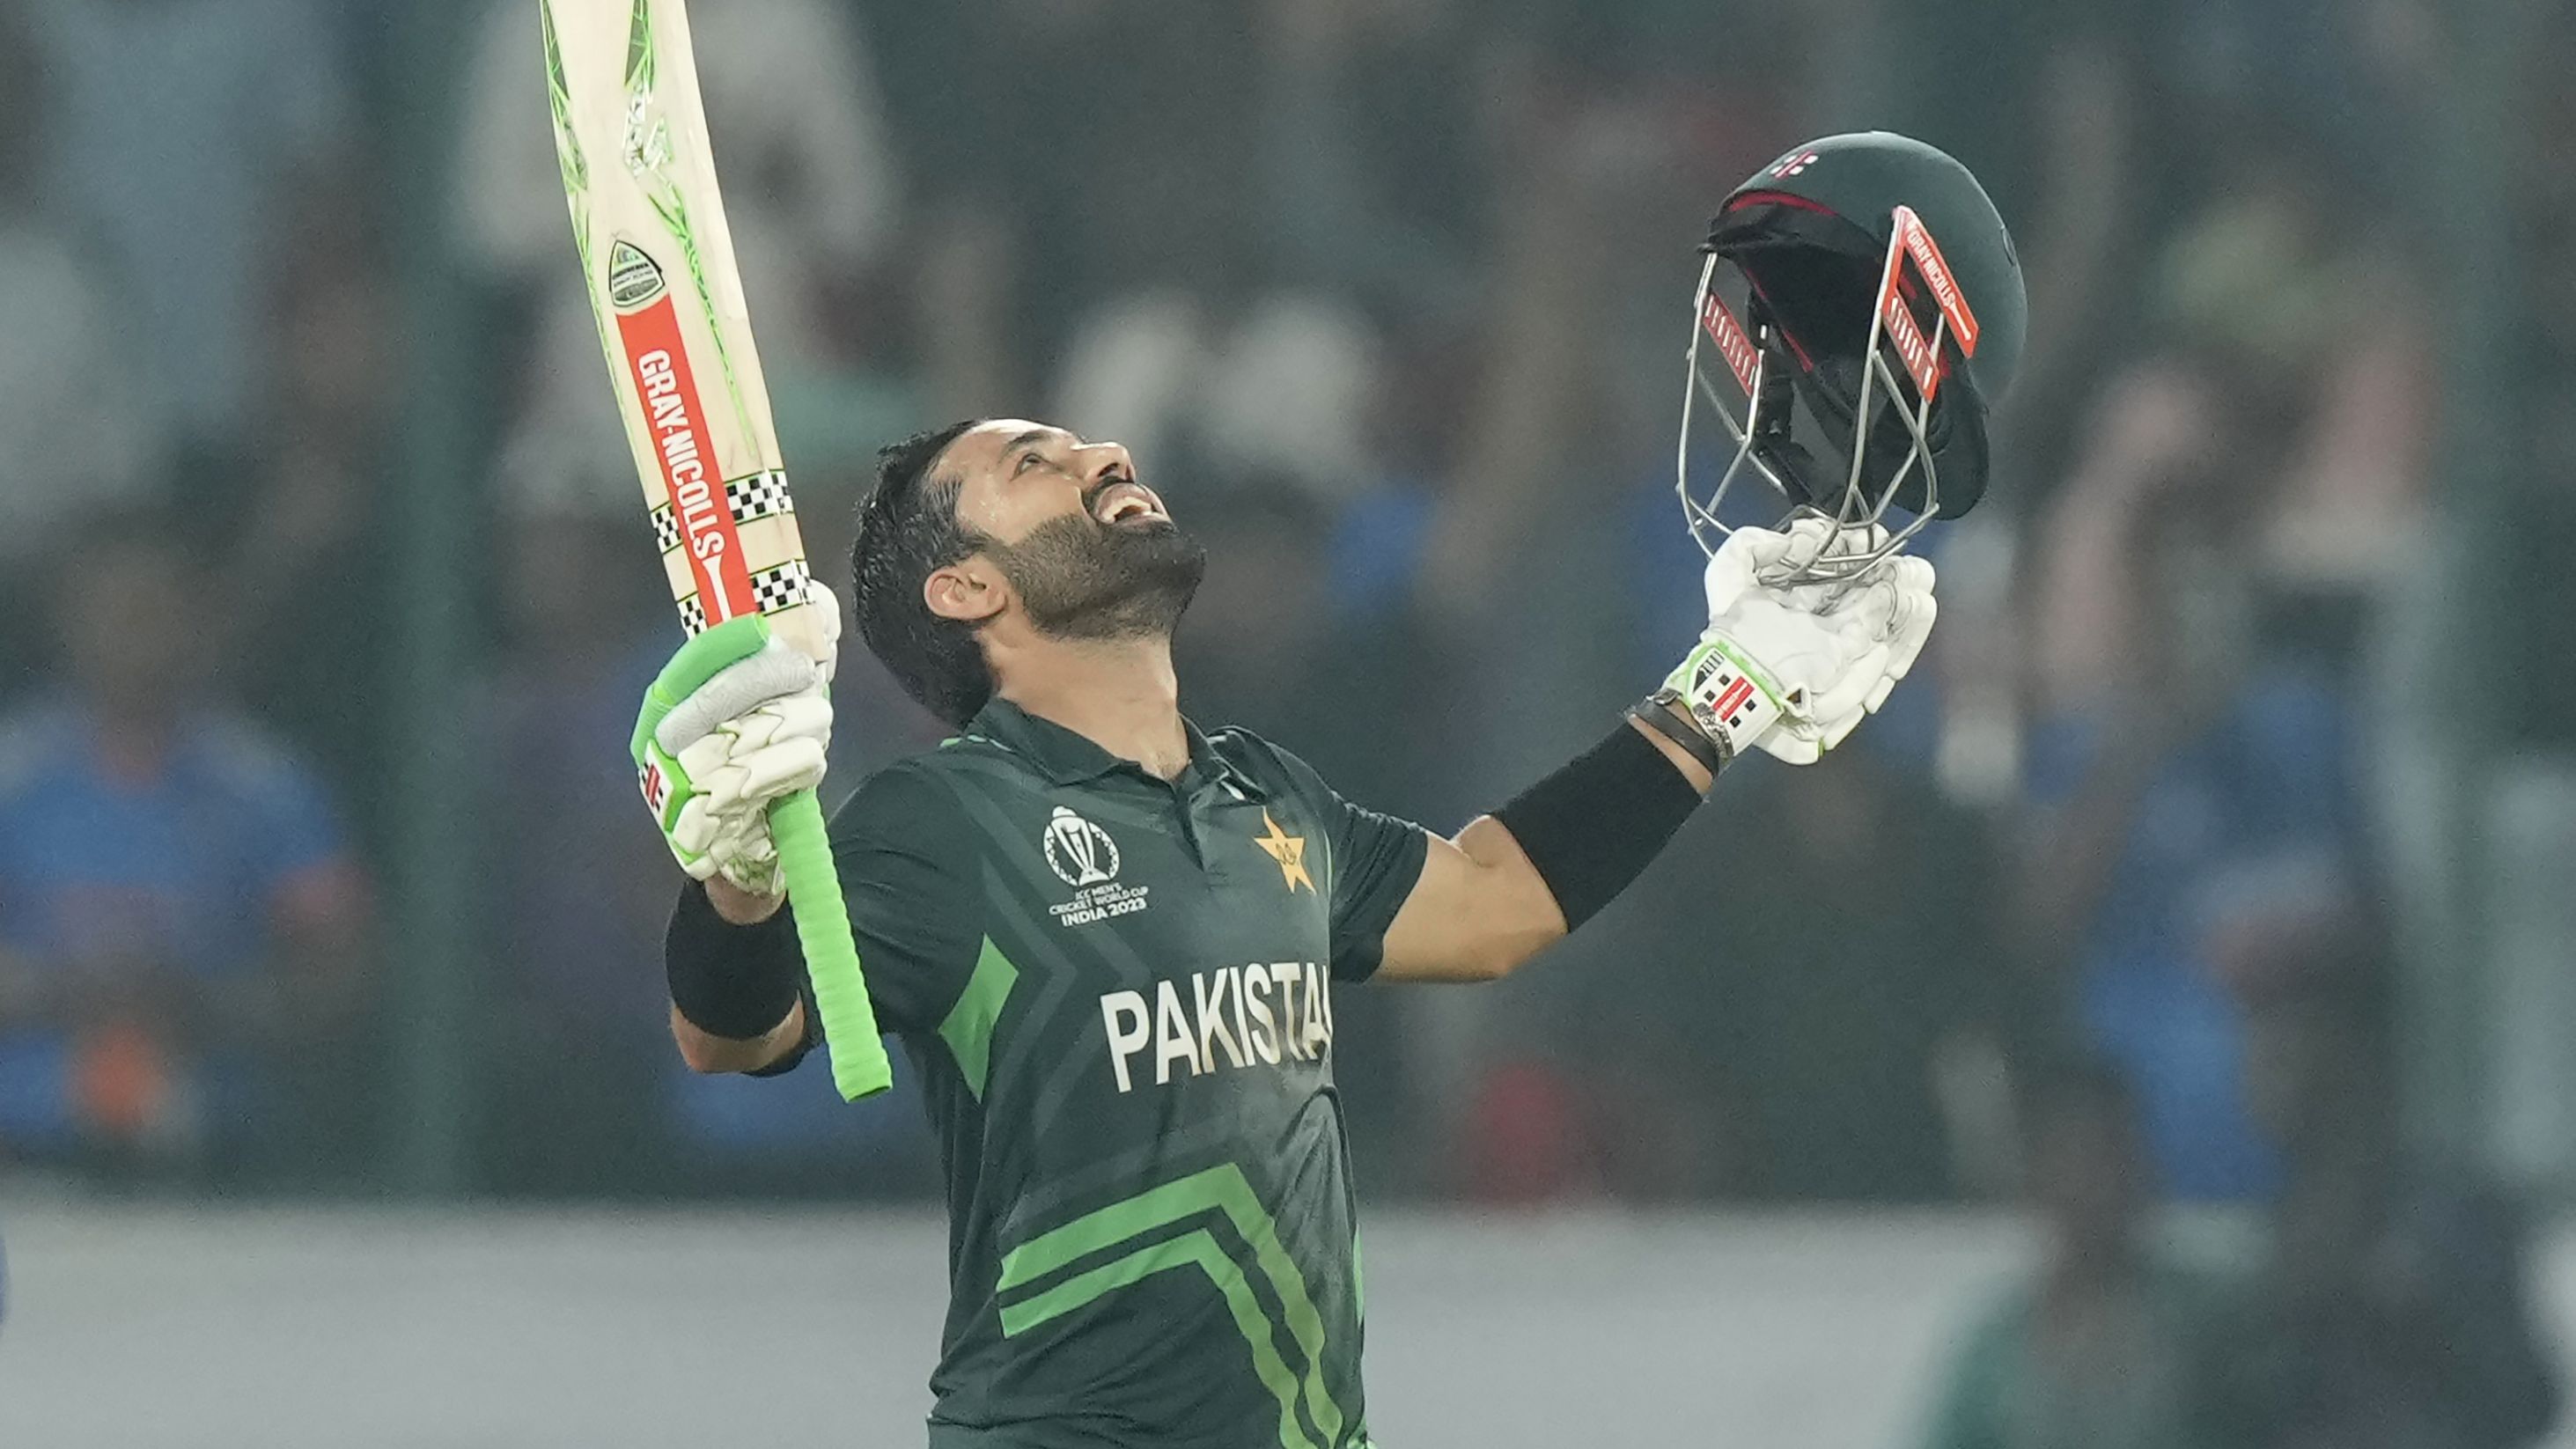 Pakistan beats Sri Lanka with record World Cup run chase, England bounces back from horror loss